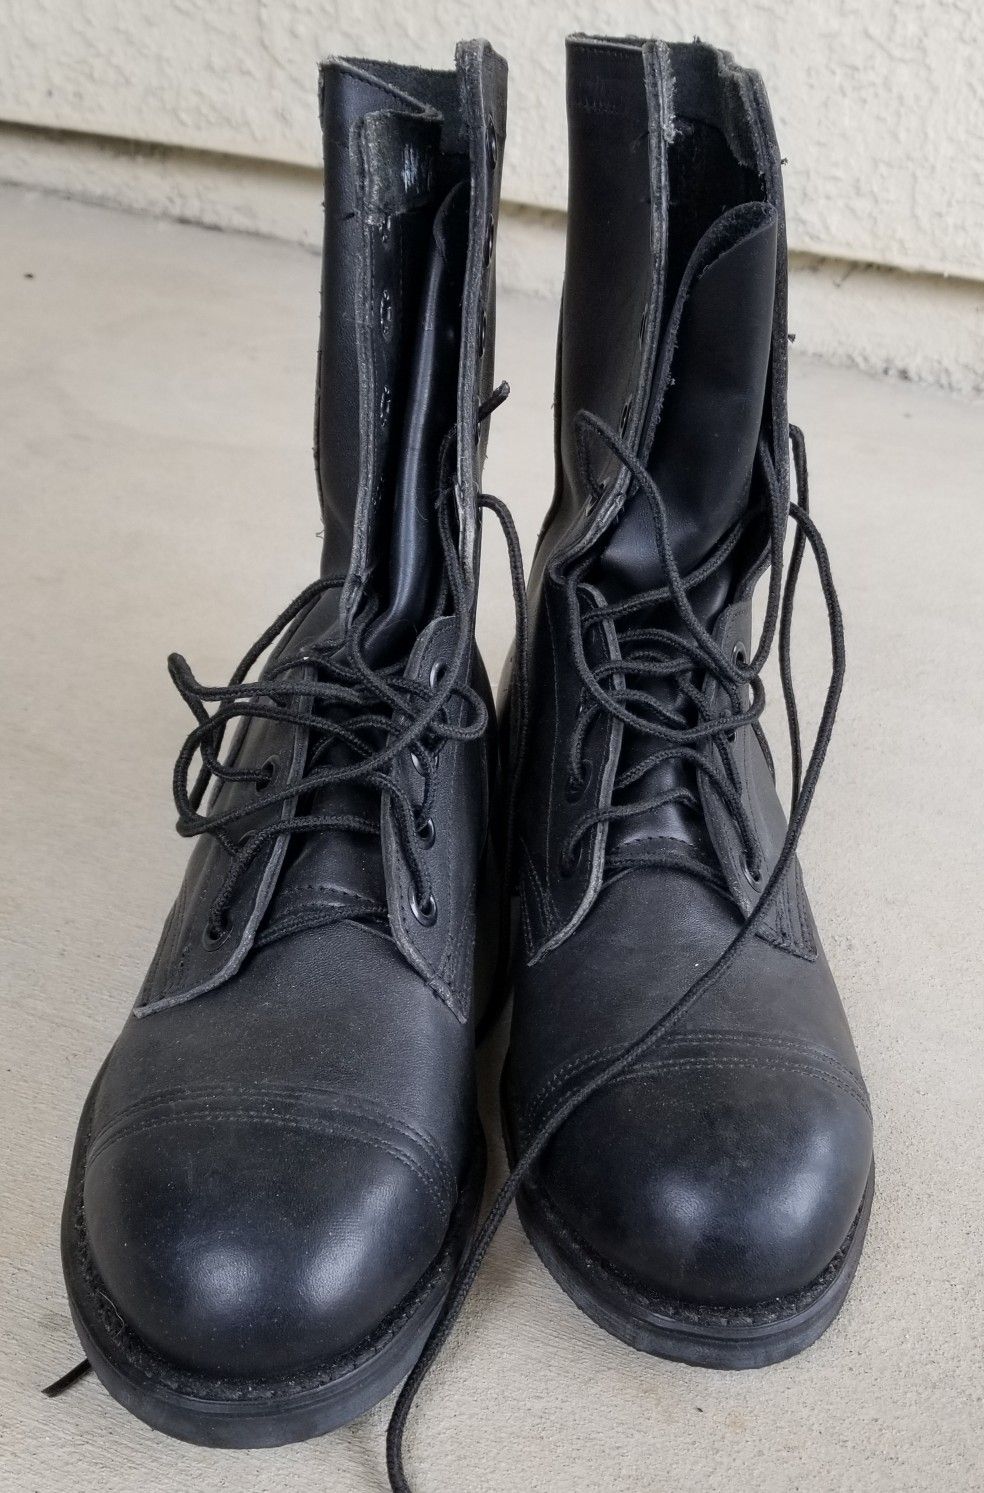 Military Steel Toe Boots